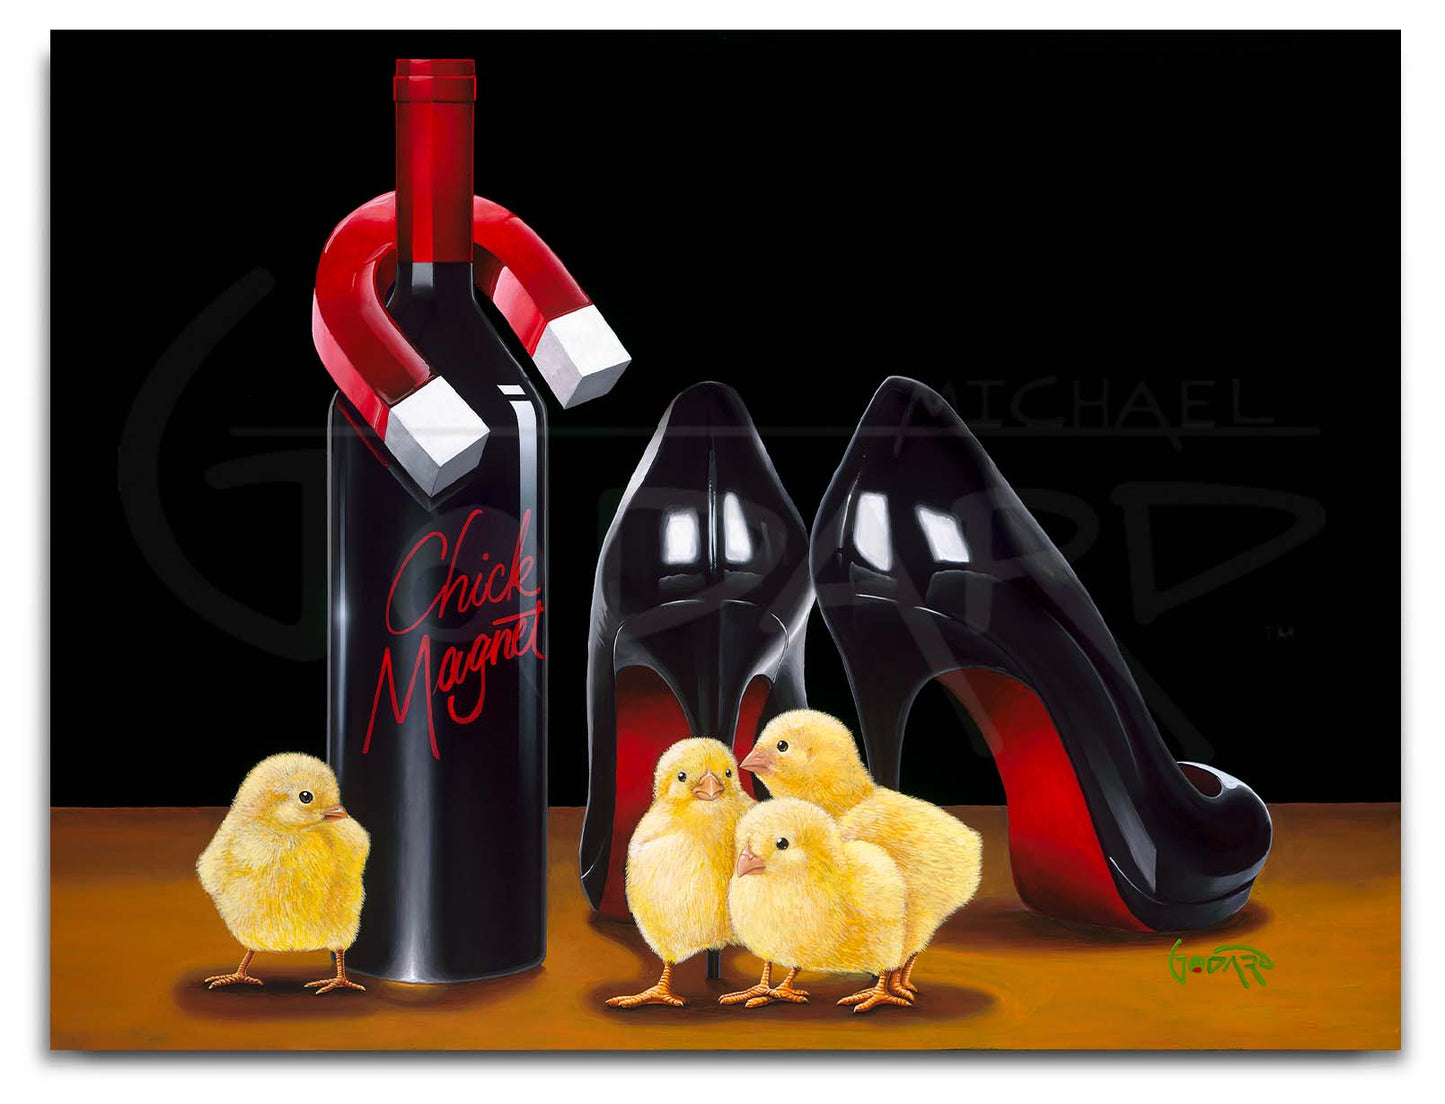 Michael Godard "Chick Magnet" Limited Edition Canvas Giclee